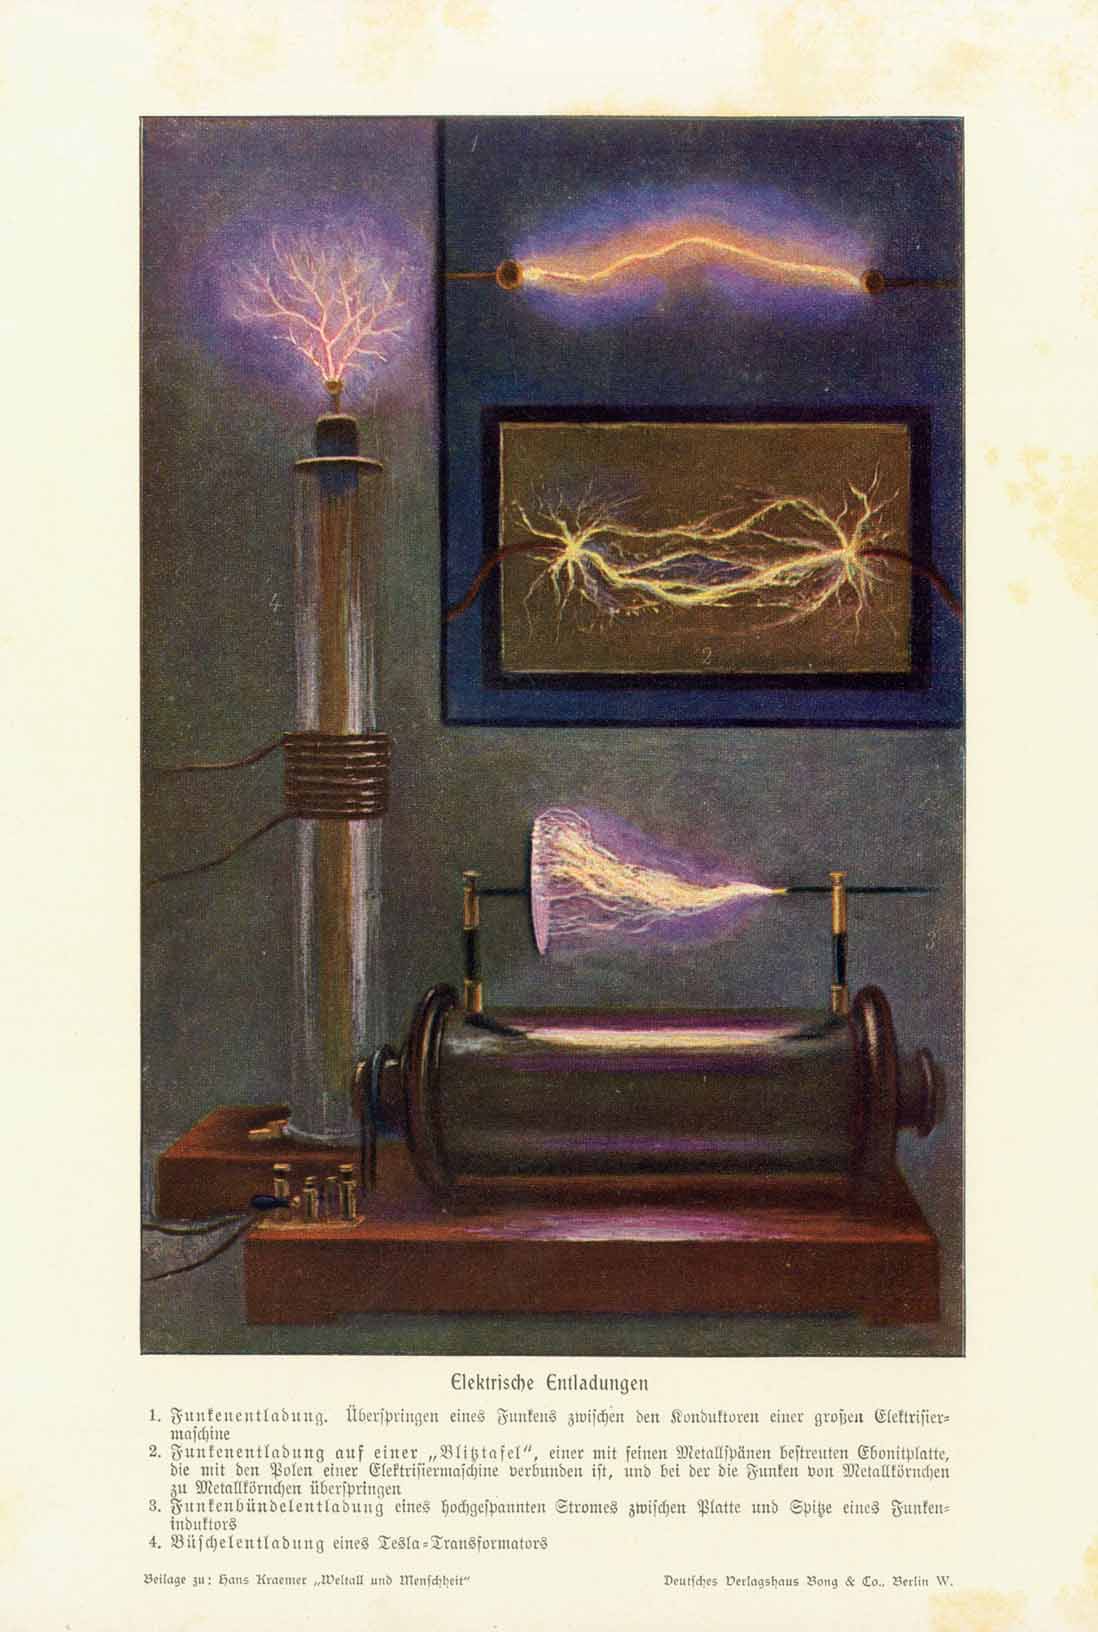 "Elektrische Entladungen"  Chromolithograph showing 4 kinds of electrical discharges. Description (in German) at the bottom of the page. Published 1905. A few very light spots in margins.